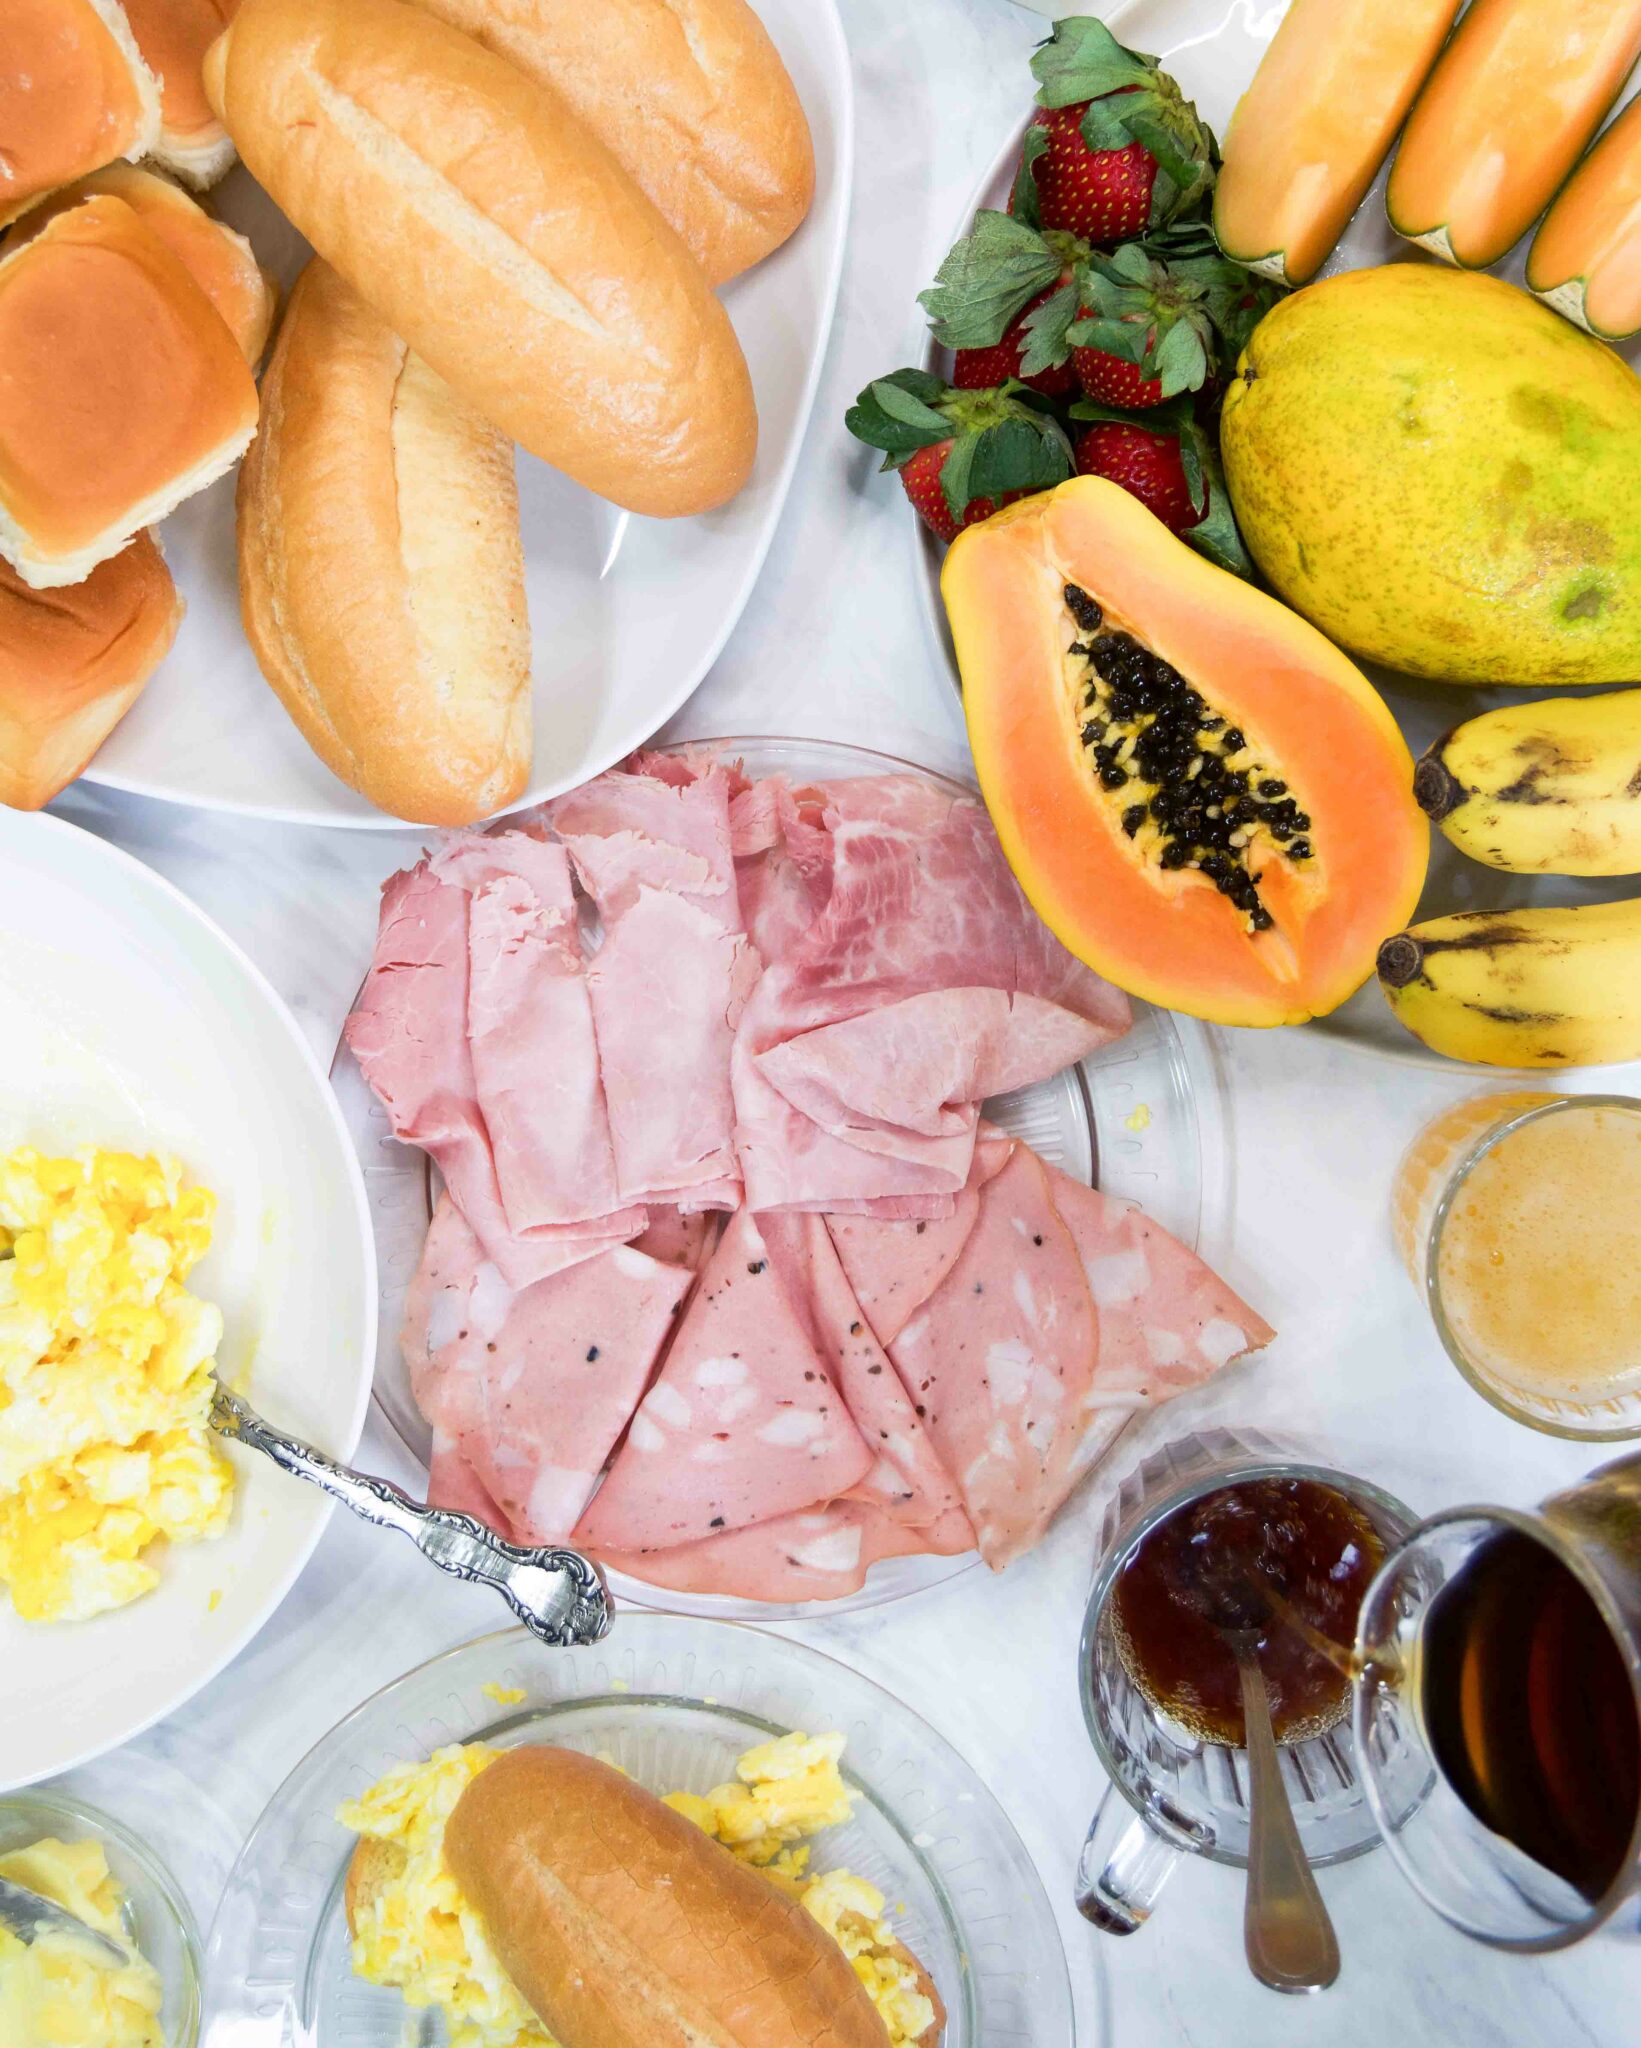 A Brazilian breakfast spread on a table with fresh fruit, cold cuts, coffee and more